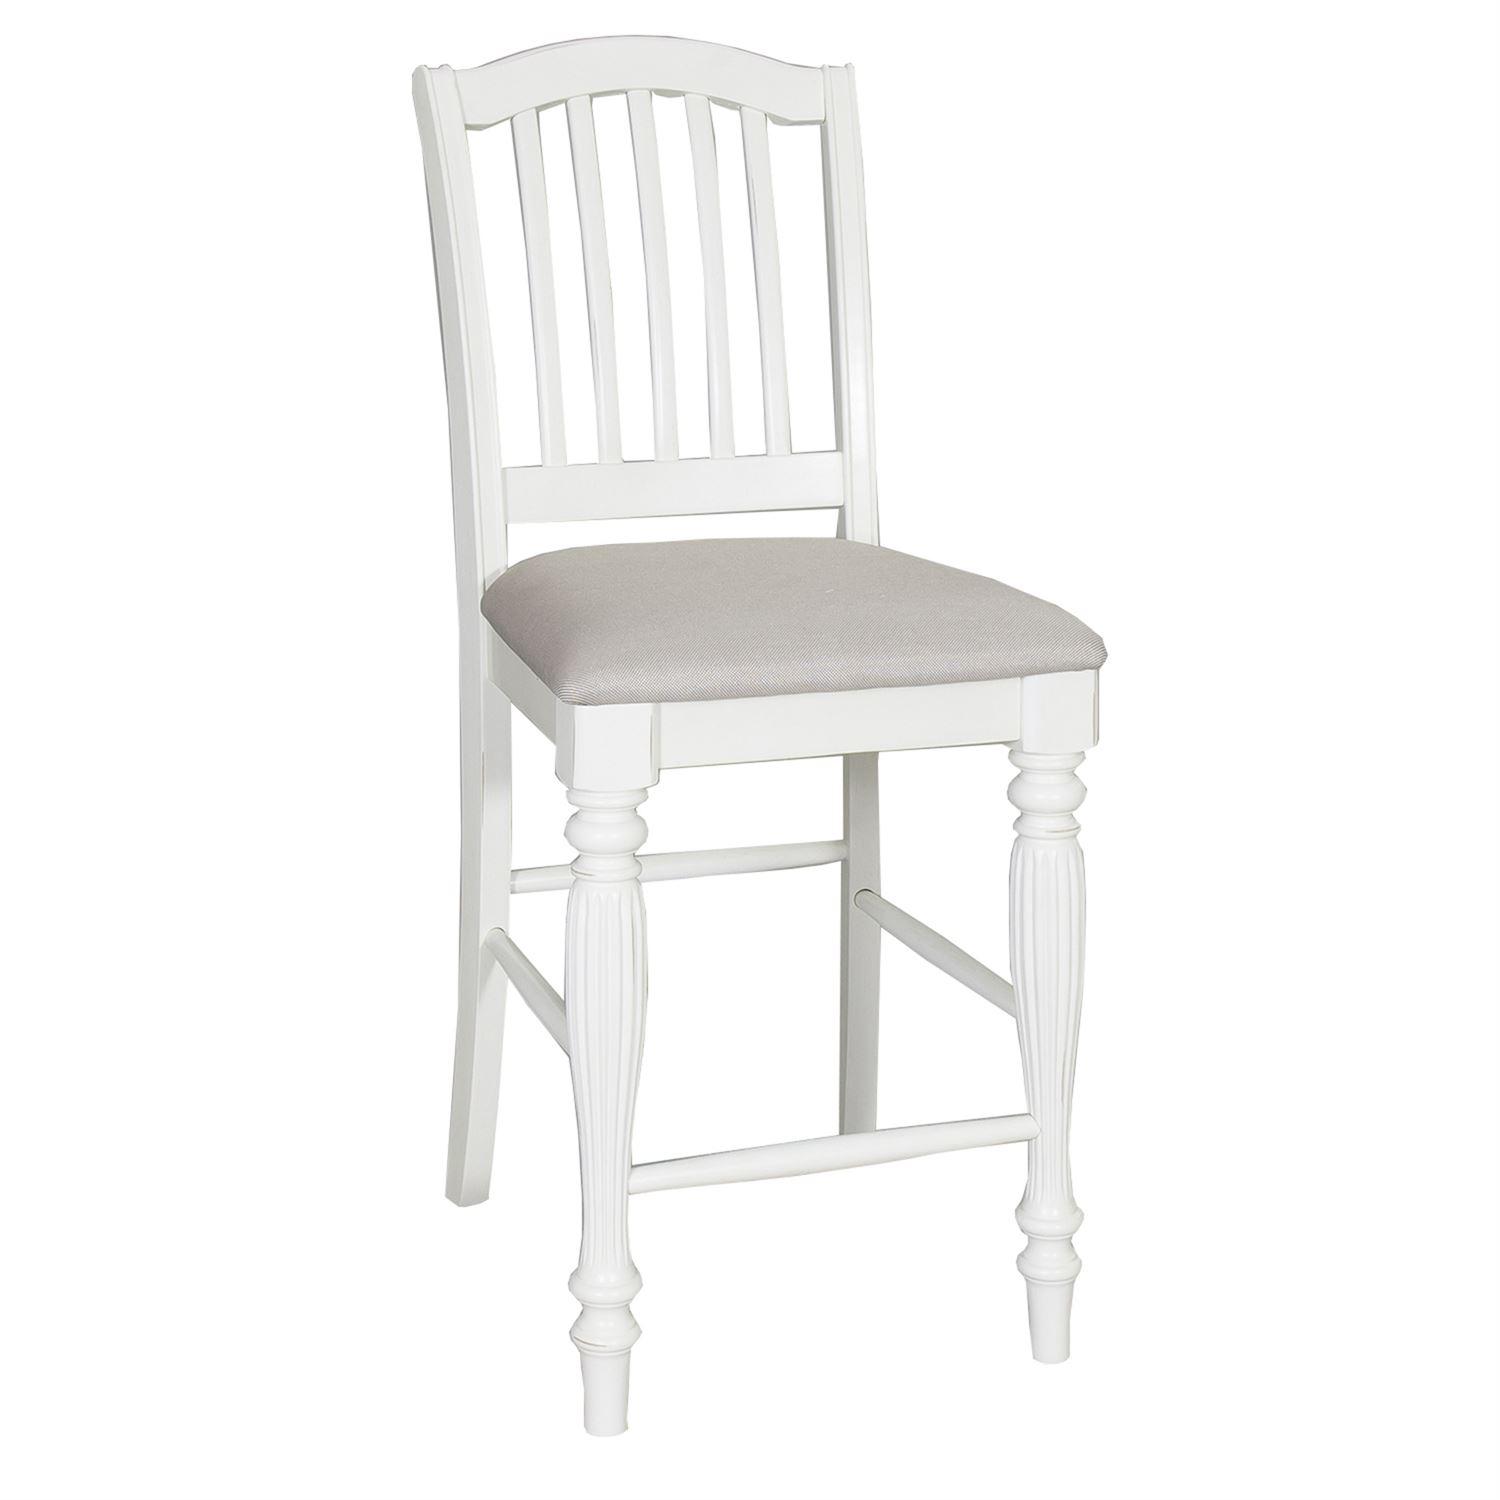 Traditional Counter Chair Cumberland Creek  (334-CD) Counter Chair 334-B150124 in White 